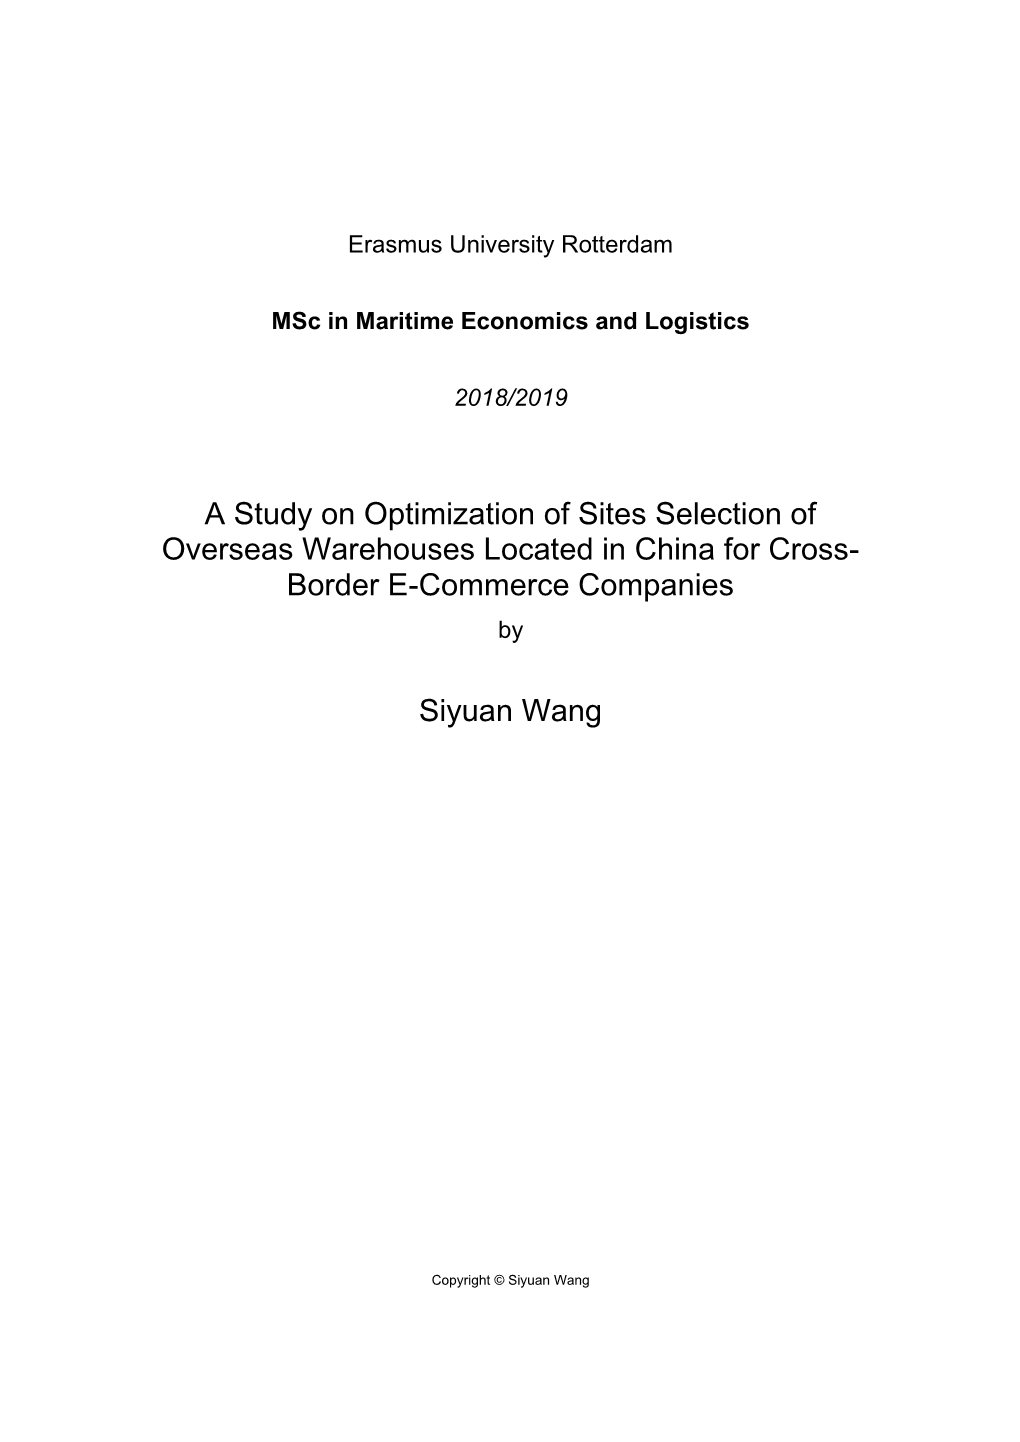 A Study on Optimization of Sites Selection of Overseas Warehouses Located in China for Cross- Border E-Commerce Companies By